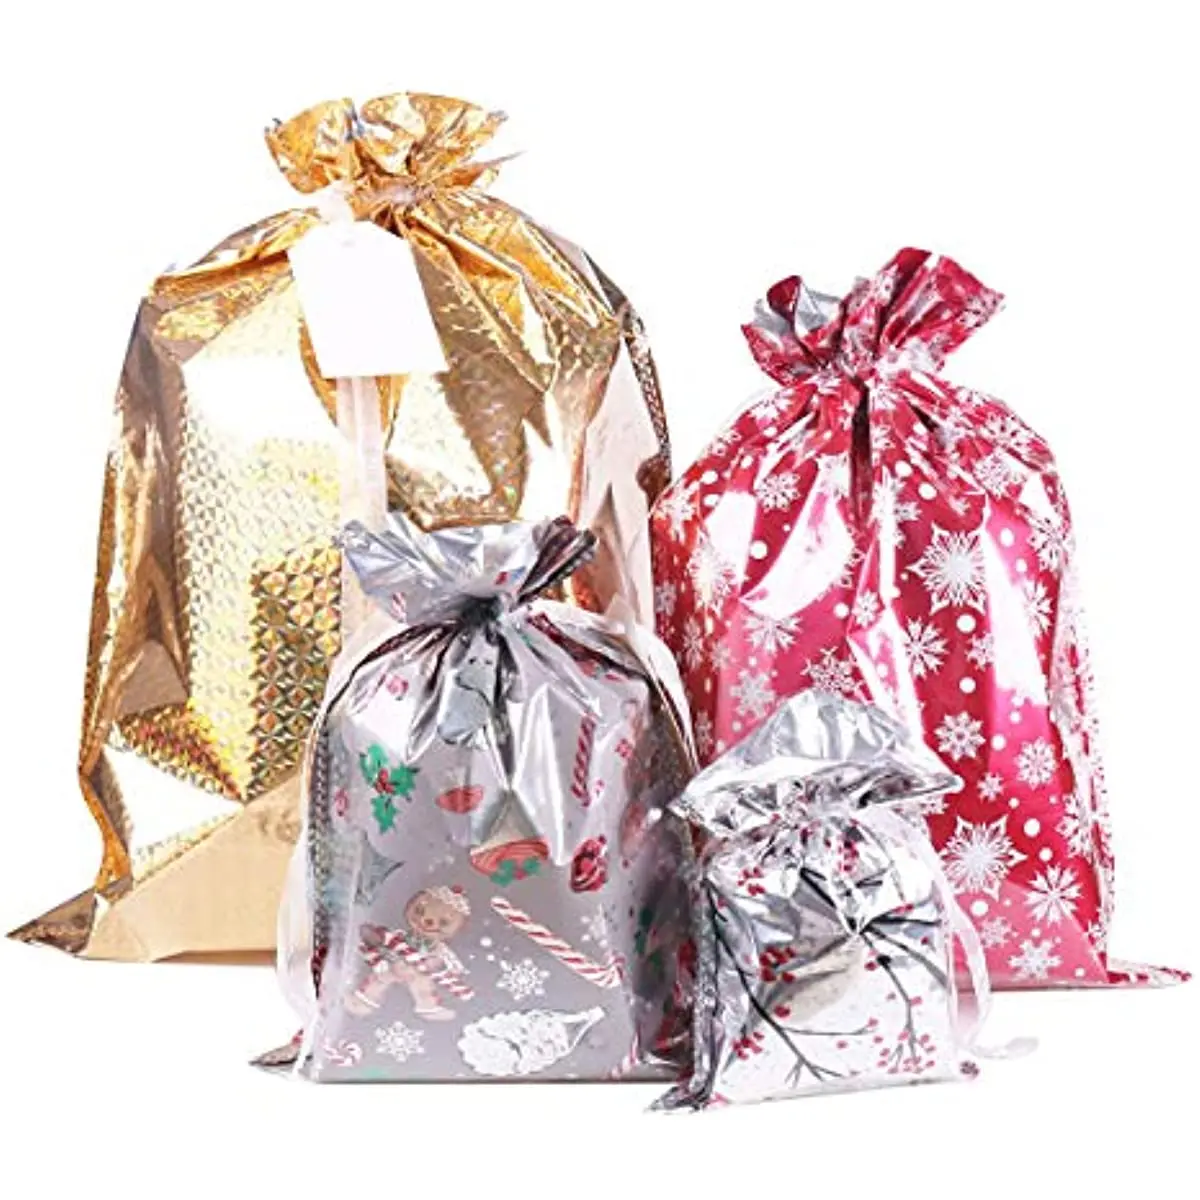 

Christmas Gift Bags,Santa Wrapping Bag in 4 Sizes and 4 Designs with Inserted Drawstring Ribbons and Tags for Wrapping Holiday